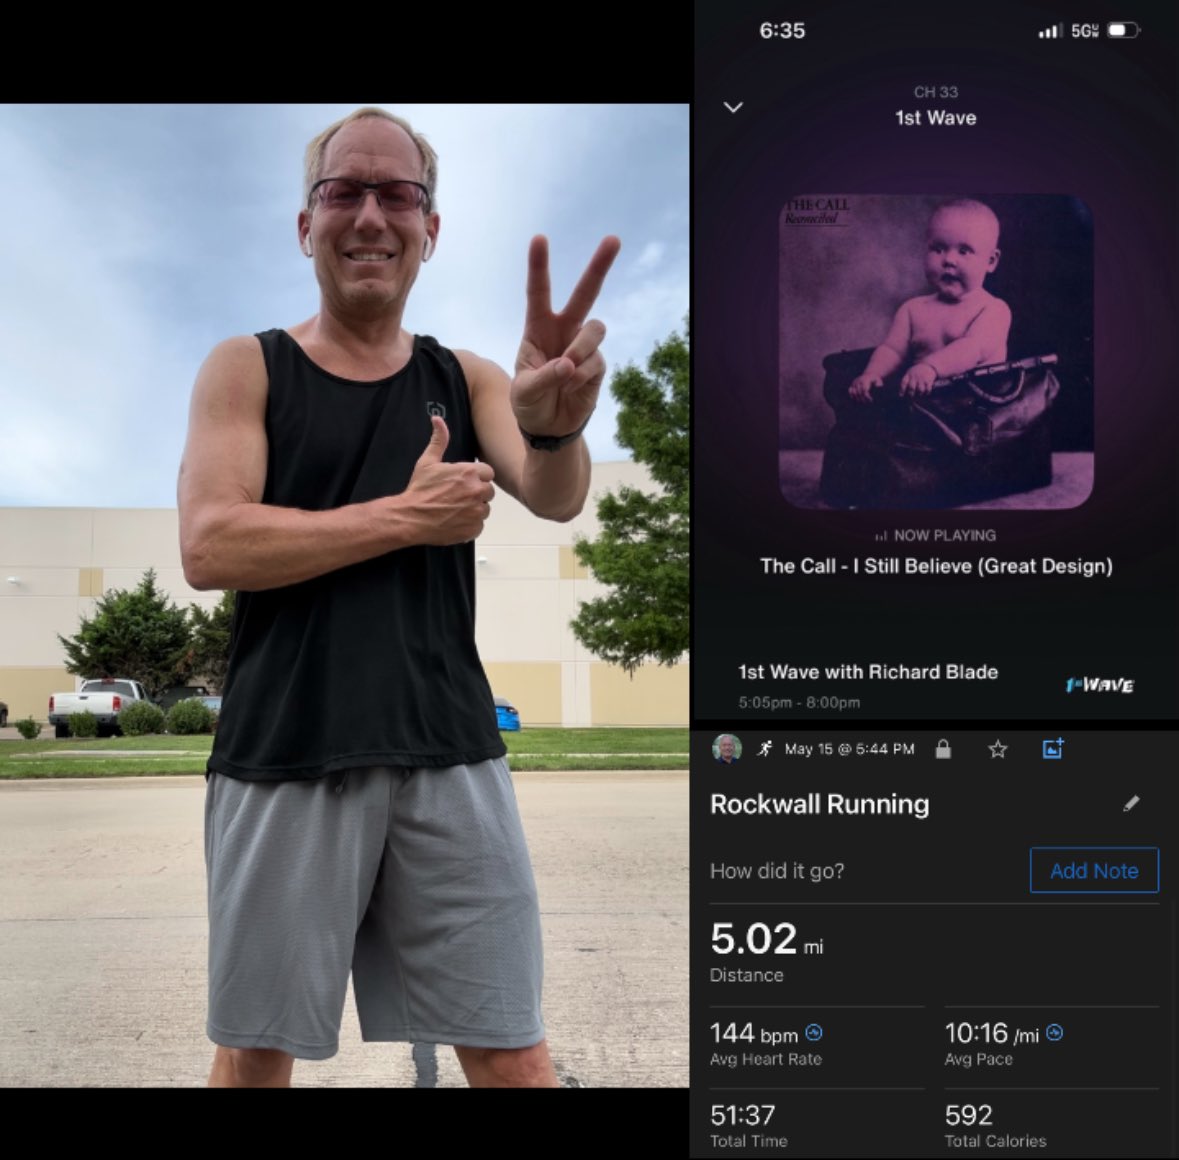 Happy #Wednesday all! Upper body workout and 5️⃣miles in the usual #Texas heat that has come back… “I Still Believe”! Thanks to @richardblade on @1stwave for the #running tunes! 10 days until the #Memphis River #run #halfmarathon ! 👍👍😂🏃‍♂️🎶 @fit_leaders #runchat #fitness 5️⃣